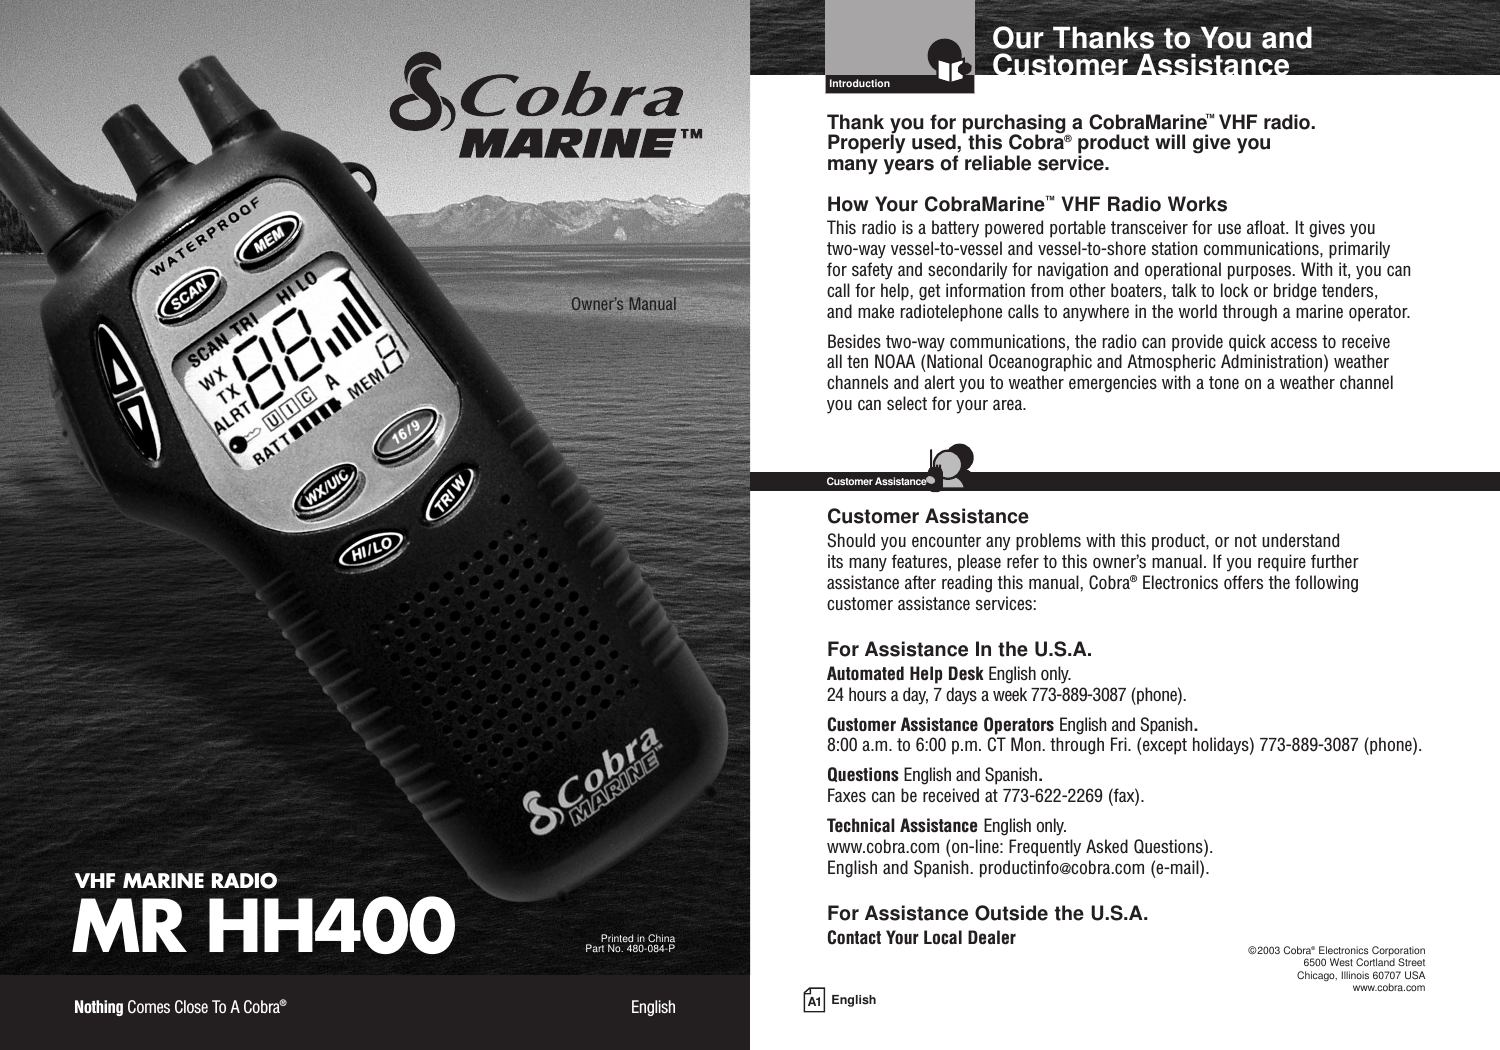 A1 EnglishOur Thanks to You andCustomer AssistanceIntroductionVHF MARINE RADIOMR HH400Printed in China Part No. 480-084-POwner’s ManualNothing Comes Close To A Cobra®EnglishThank you for purchasing a CobraMarine™VHF radio. Properly used, this Cobra®product will give you many years of reliable service.How Your CobraMarine™VHF Radio WorksThis radio is a battery powered portable transceiver for use afloat. It gives you two-way vessel-to-vessel and vessel-to-shore station communications, primarily for safety and secondarily for navigation and operational purposes. With it, you cancall for help, get information from other boaters, talk to lock or bridge tenders, and make radiotelephone calls to anywhere in the world through a marine operator.Besides two-way communications, the radio can provide quick access to receive all ten NOAA (National Oceanographic and Atmospheric Administration) weatherchannels and alert you to weather emergencies with a tone on a weather channelyou can select for your area.Customer AssistanceShould you encounter any problems with this product, or not understand its many features, please refer to this owner’s manual. If you require furtherassistance after reading this manual, Cobra®Electronics offers the followingcustomer assistance services:For Assistance In the U.S.A. Automated Help Desk English only.24 hours a day, 7 days a week 773-889-3087 (phone).Customer Assistance Operators English and Spanish.8:00 a.m. to 6:00 p.m. CT Mon. through Fri. (except holidays) 773-889-3087 (phone).Questions English and Spanish.Faxes can be received at 773-622-2269 (fax).Technical Assistance English only.www.cobra.com (on-line: Frequently Asked Questions).English and Spanish. productinfo@cobra.com (e-mail).For Assistance Outside the U.S.A.Contact Your Local DealerCustomer Assistance©2003 Cobra®Electronics Corporation6500 West Cortland StreetChicago, Illinois 60707 USAwww.cobra.com